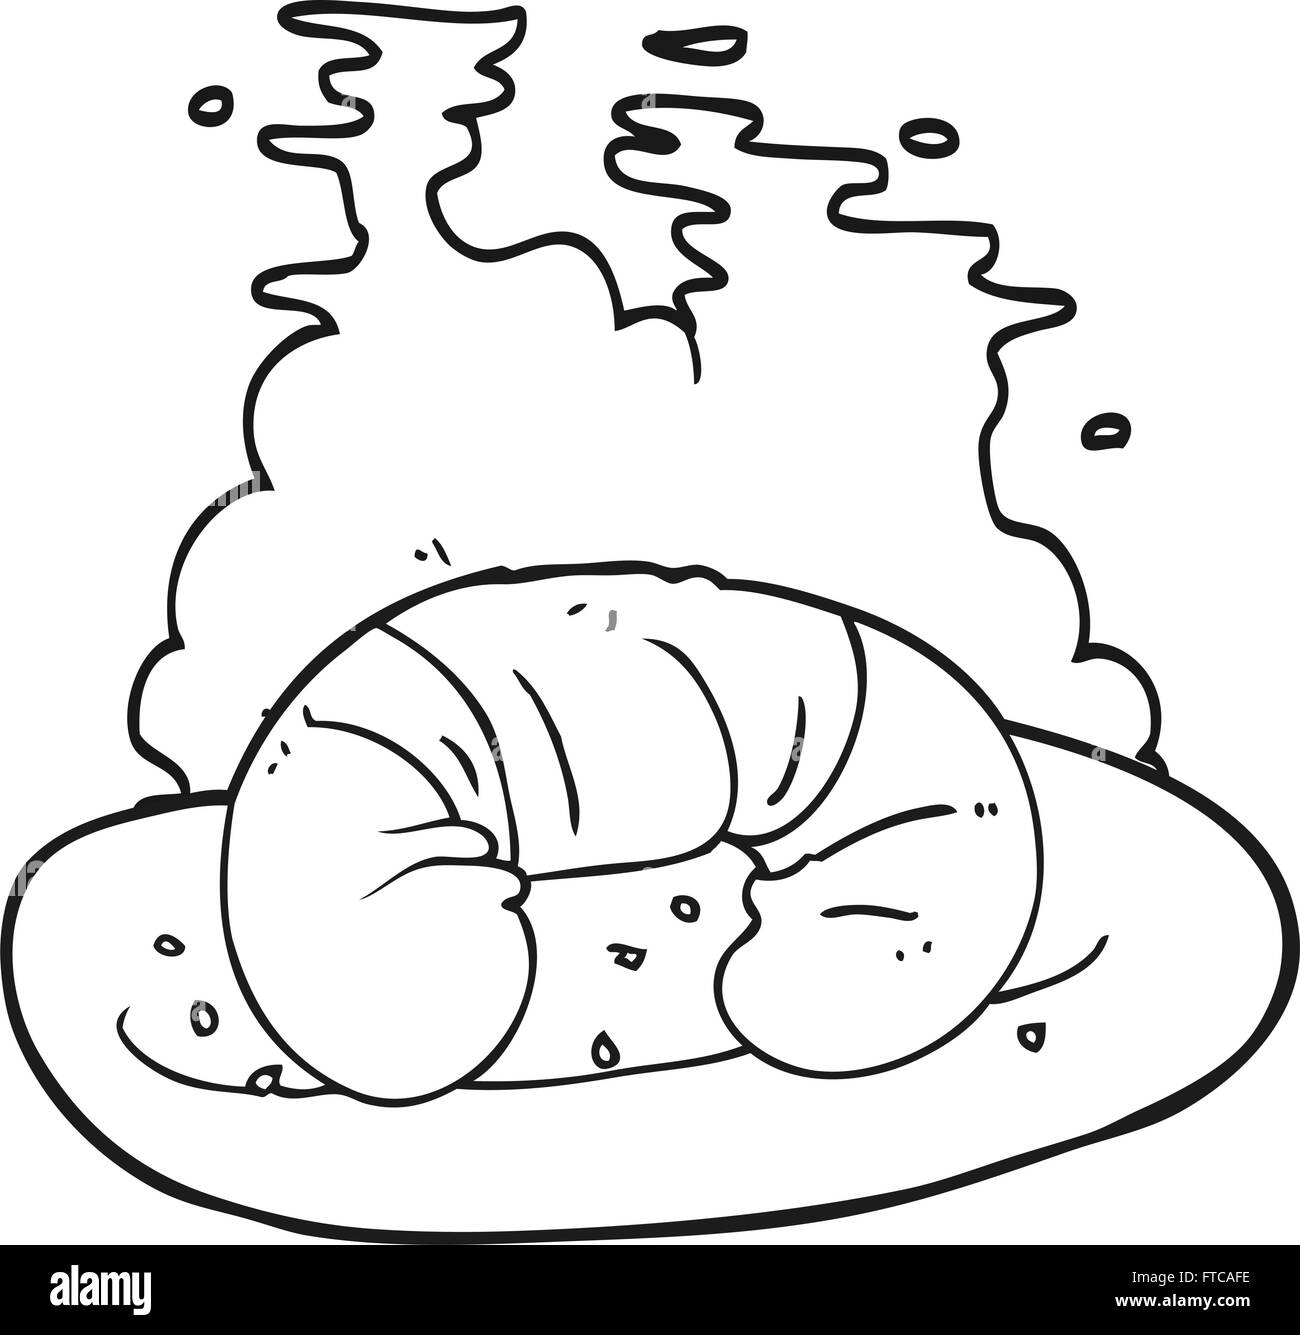 freehand drawn black and white cartoon hot croissant Stock Vector